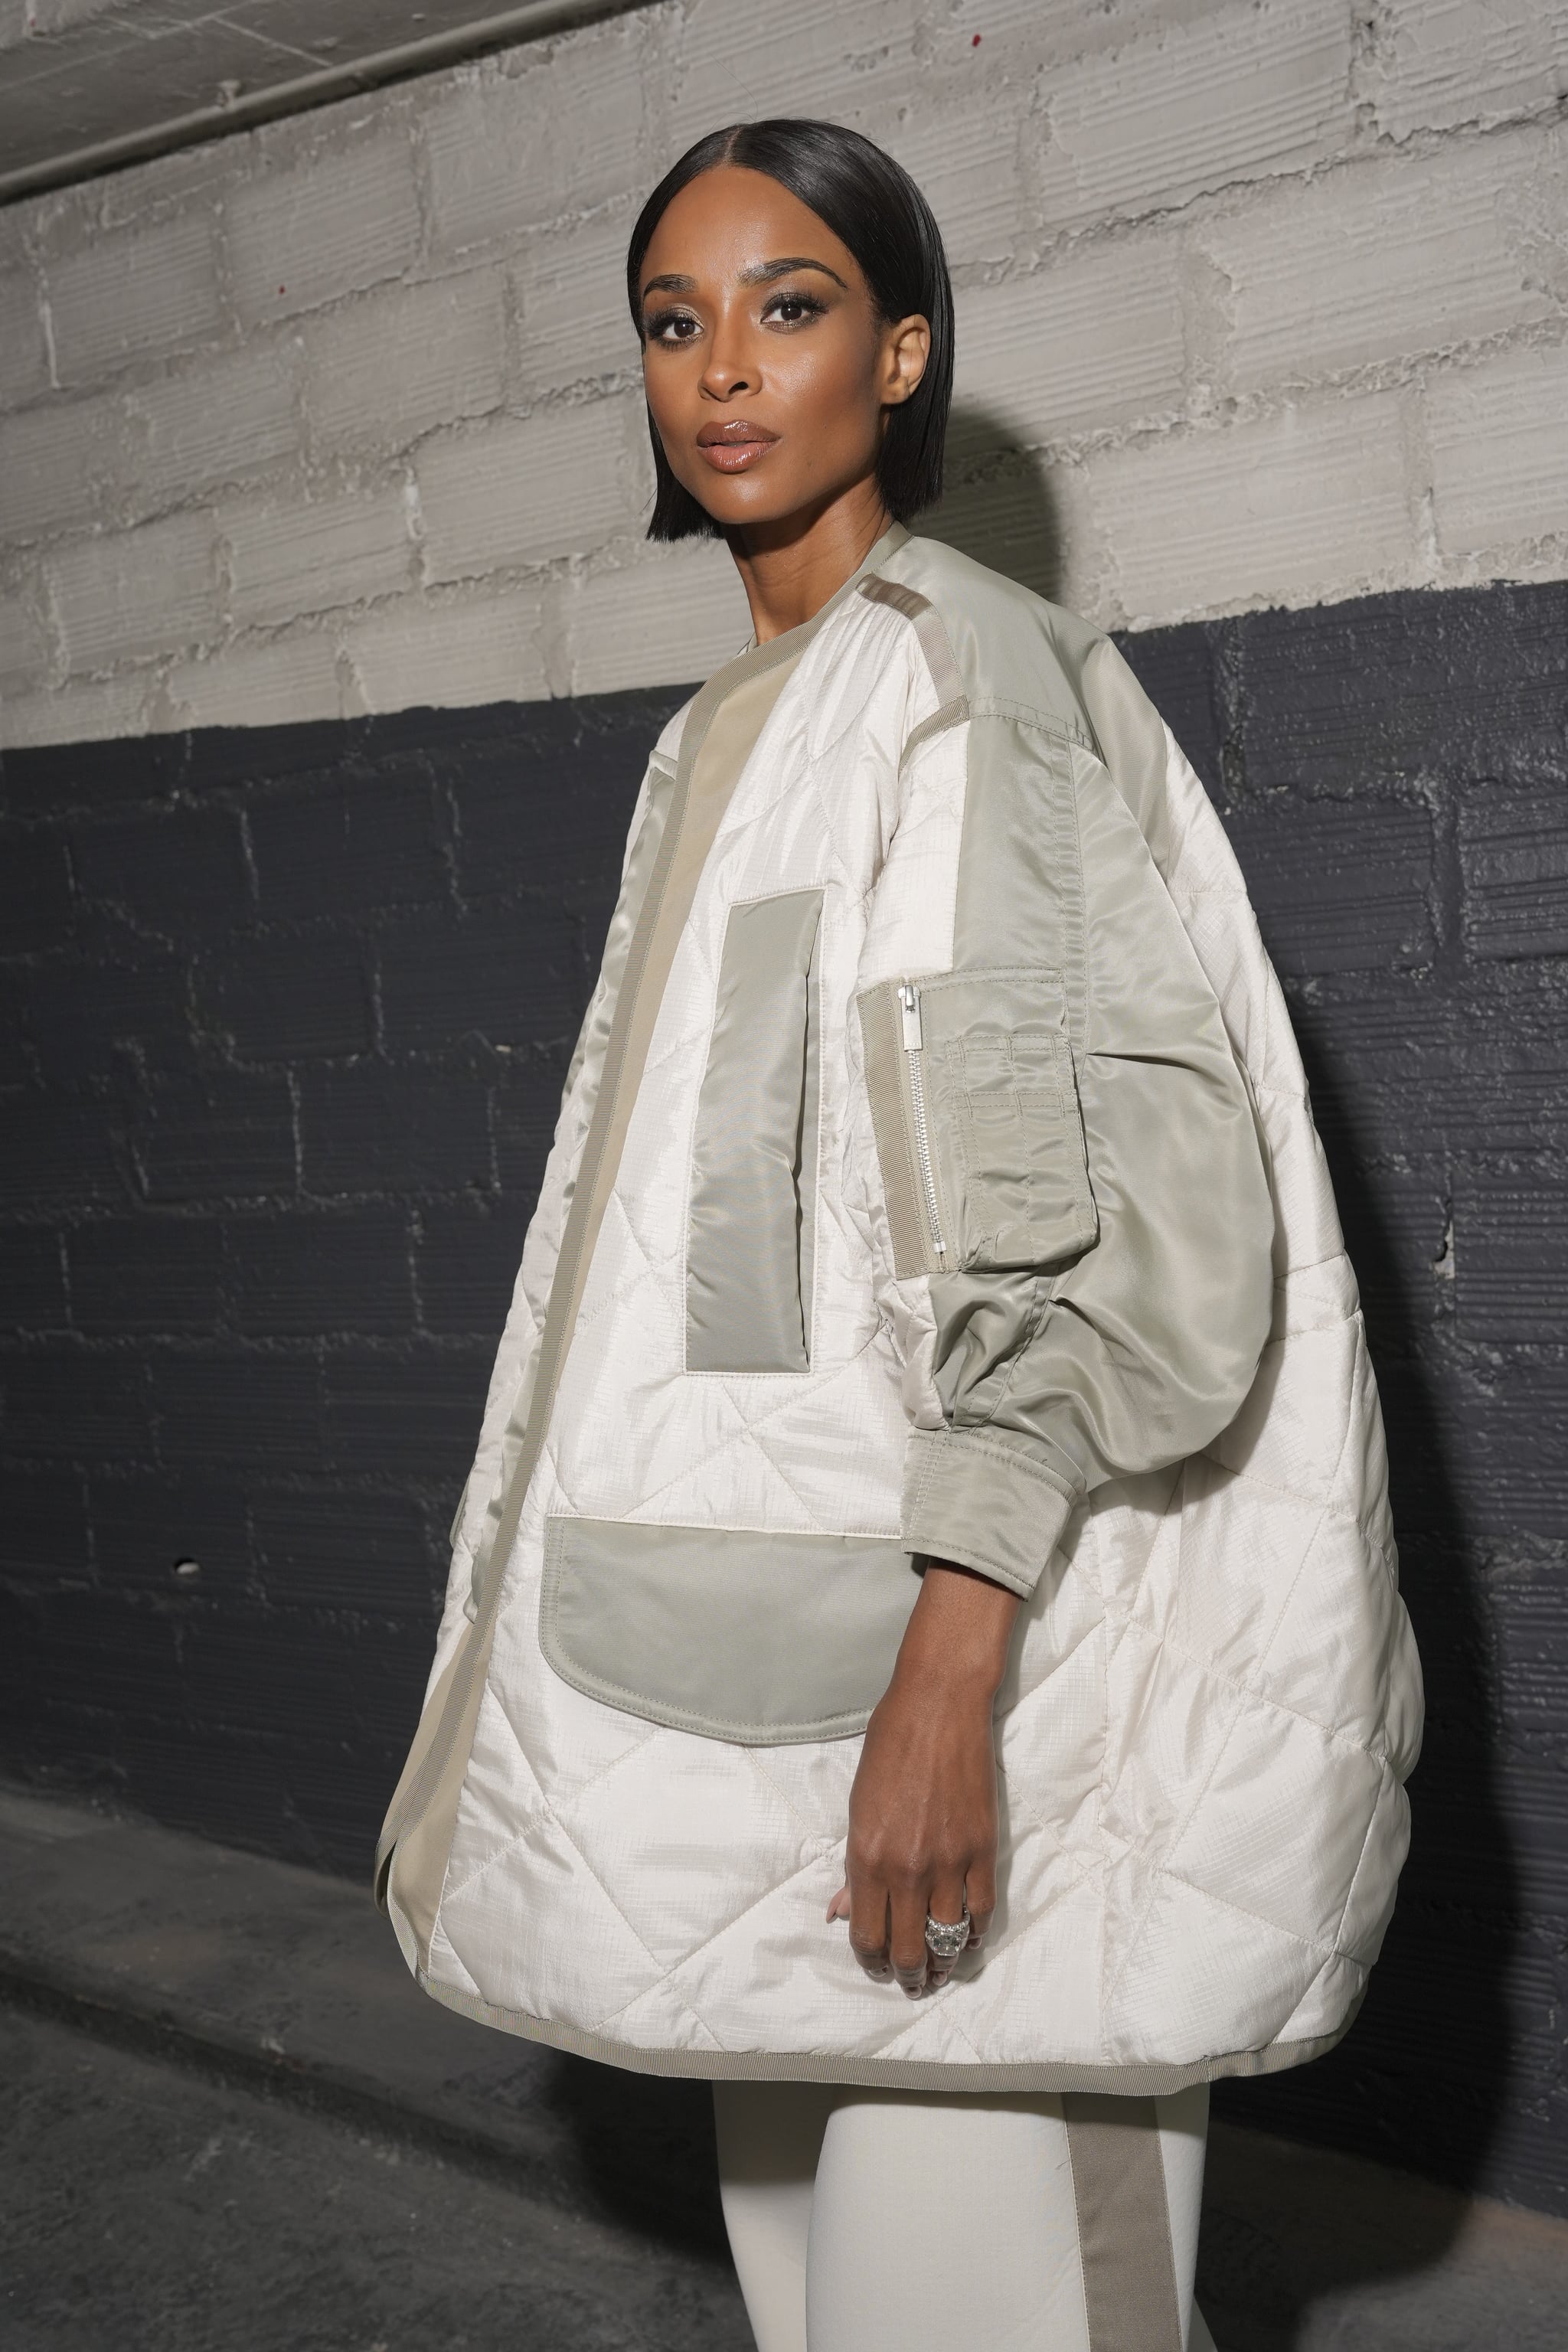 Ciara at Sacai Fall 2023 Ready To Wear Runway Show on March 6, 2023 in Paris, France. (Photo by Swan Gallet/WWD via Getty Images)